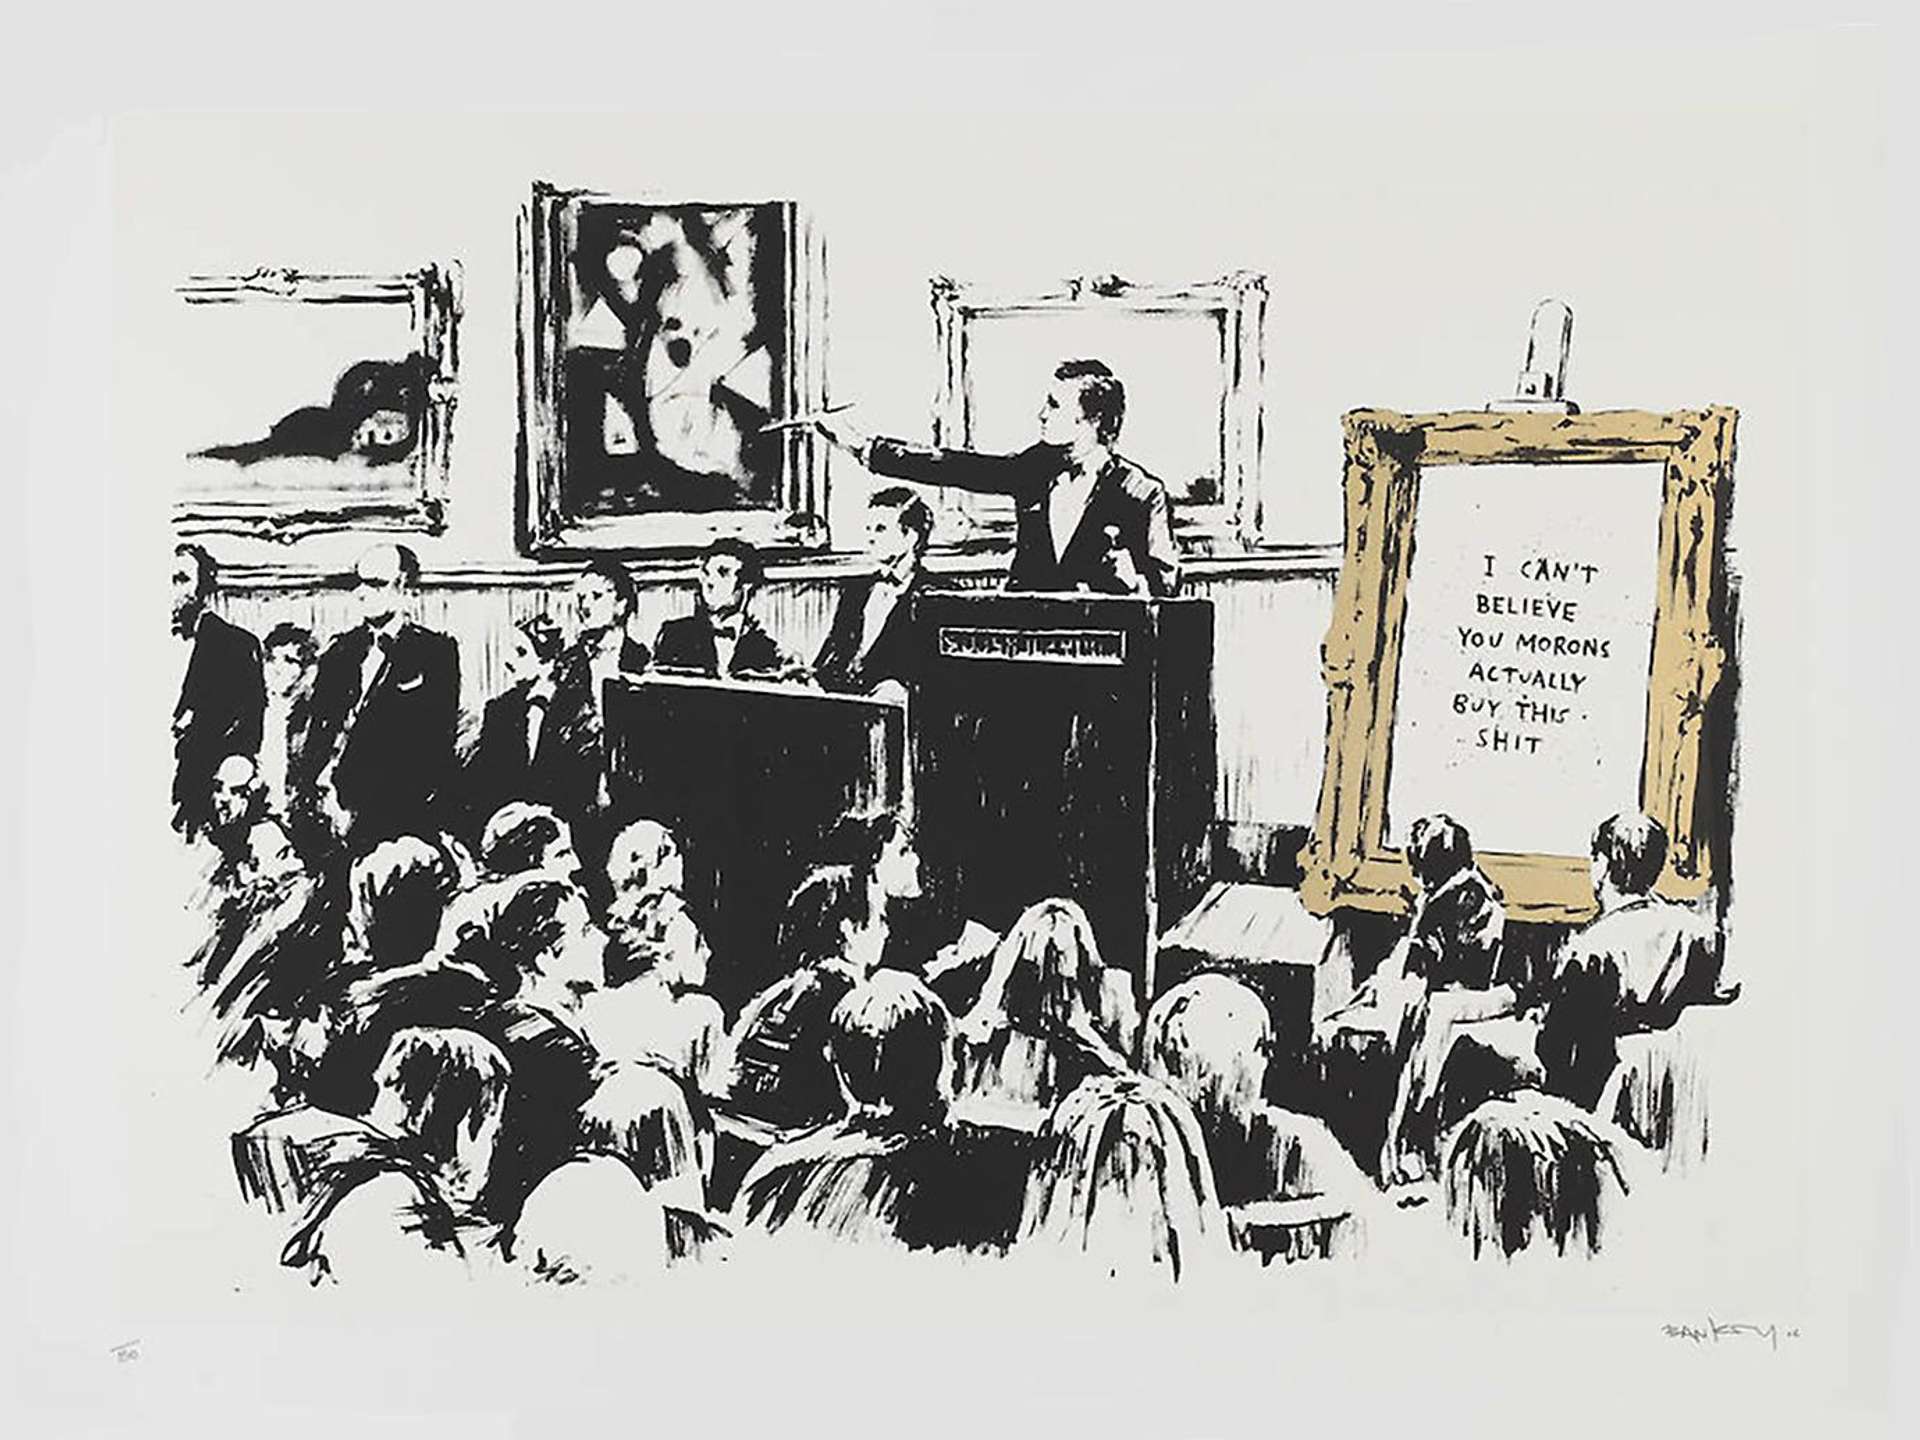 A Concise History of the Art Market